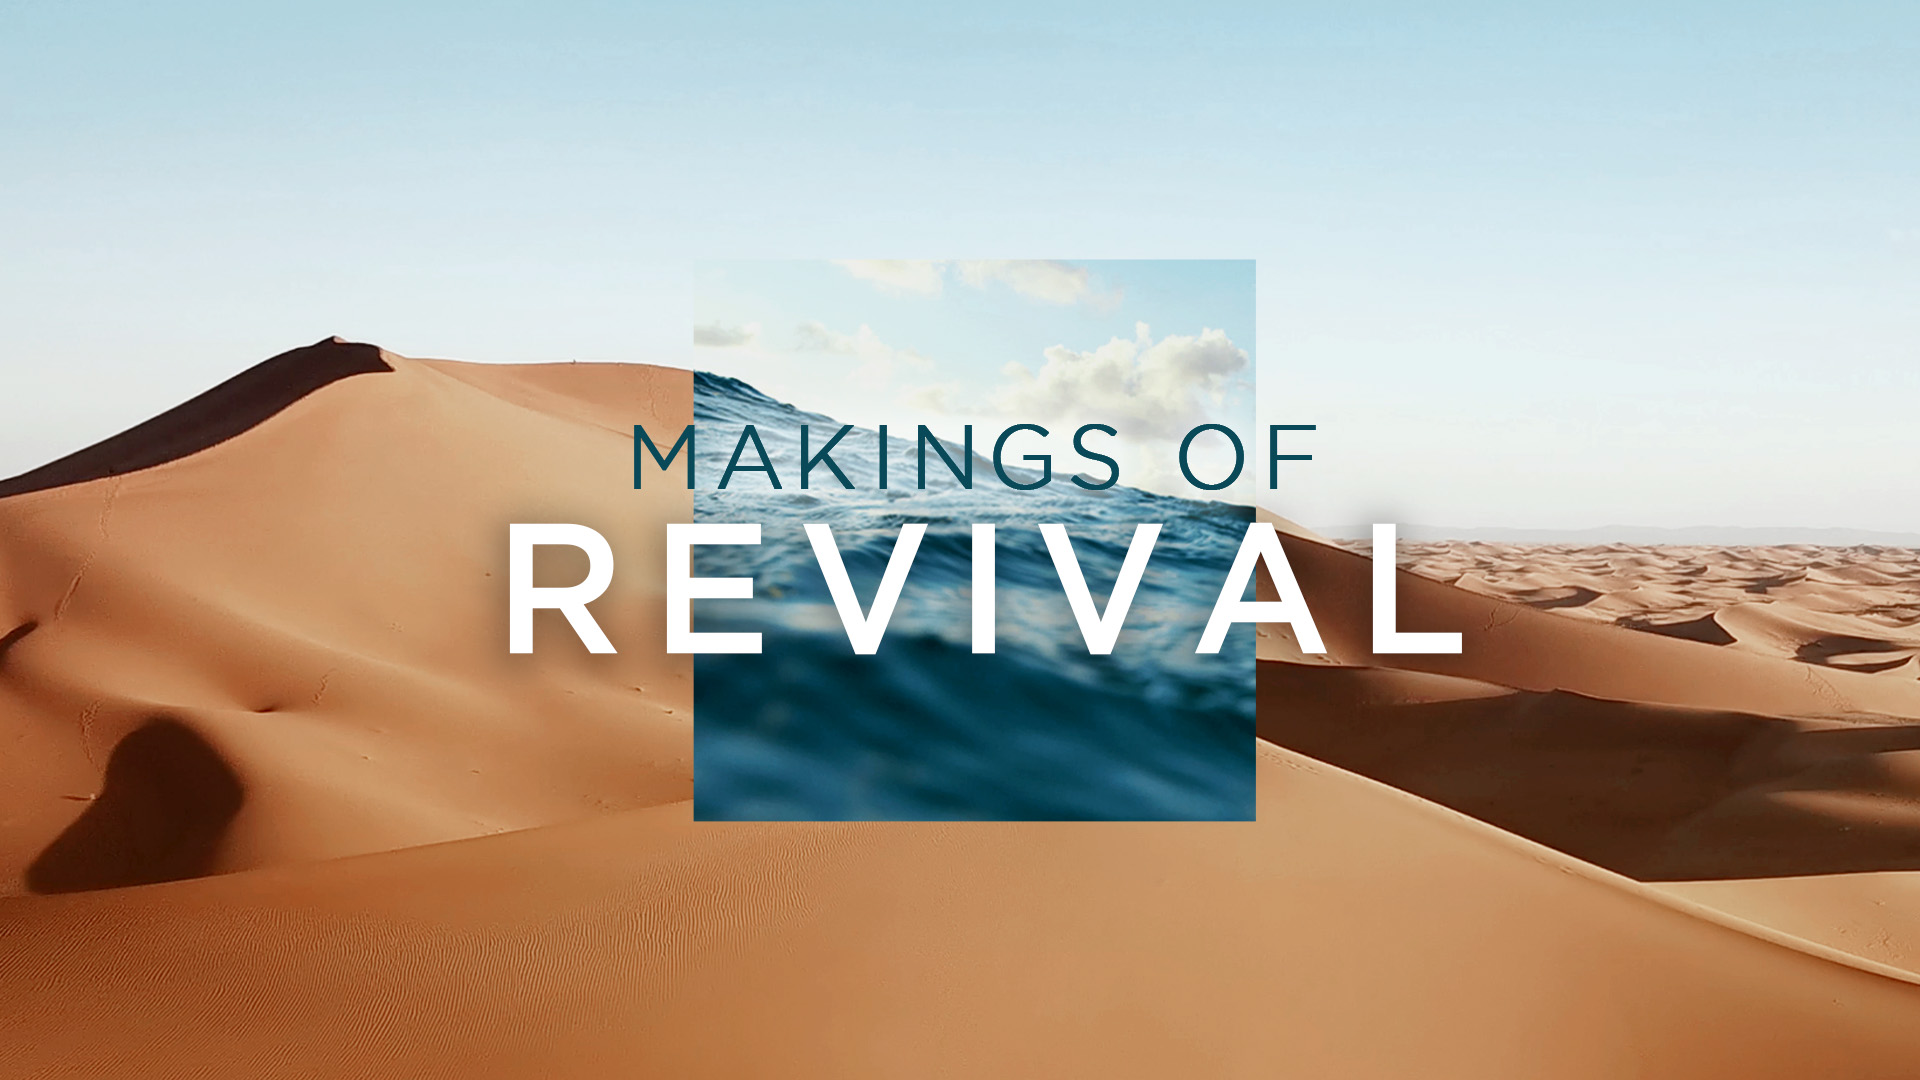 Generous Giving Marks Revival